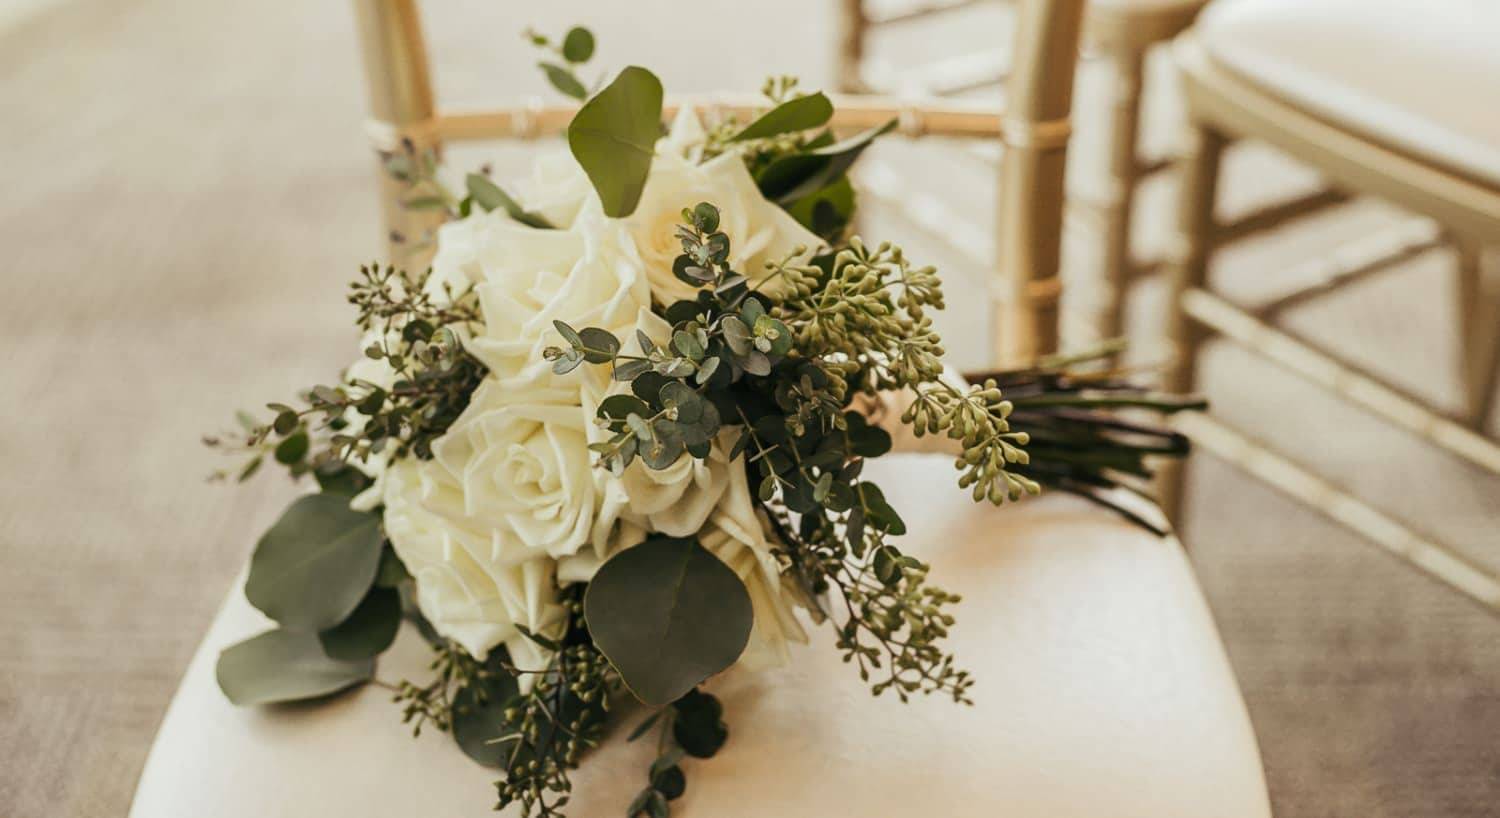 Bouquet of white flowers placed on white cushioned chair